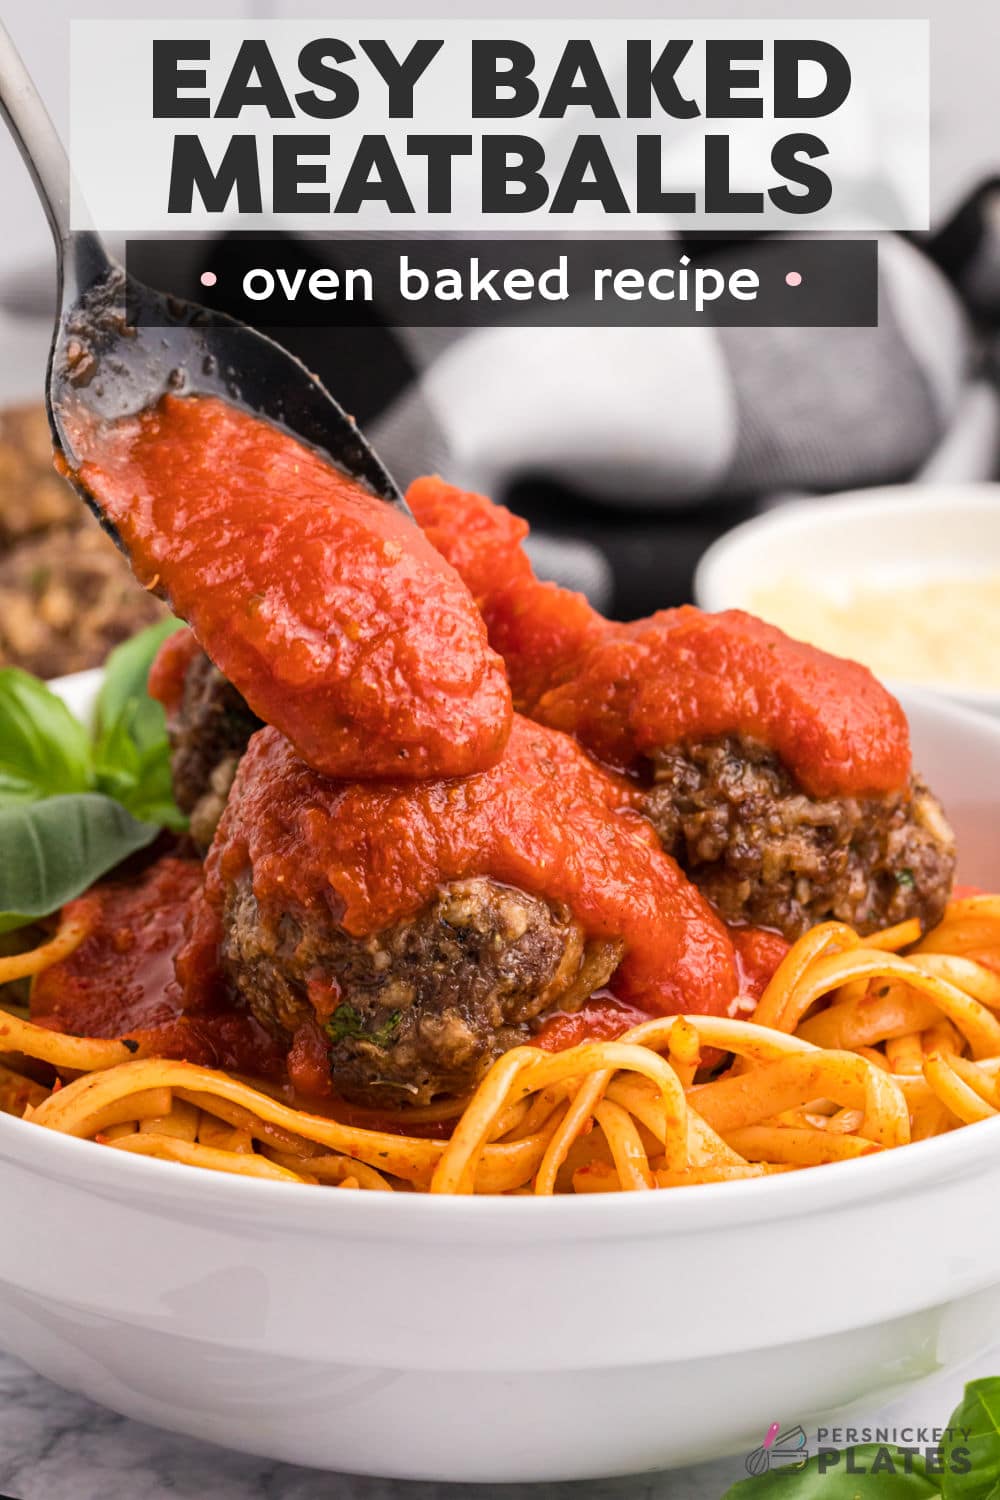 Easy Oven Baked Meatballs are juicy, tender, and super flavorful. These baked ground beef meatballs are ready in 35 minutes with no grease splatter to cleanup which makes them the perfect meal any day of the week. Serve them over pasta, as an appetizer, in a sandwich, or get ahead with your meal prep by doubling the batch and freezing some for later! | www.persnicketyplates.com